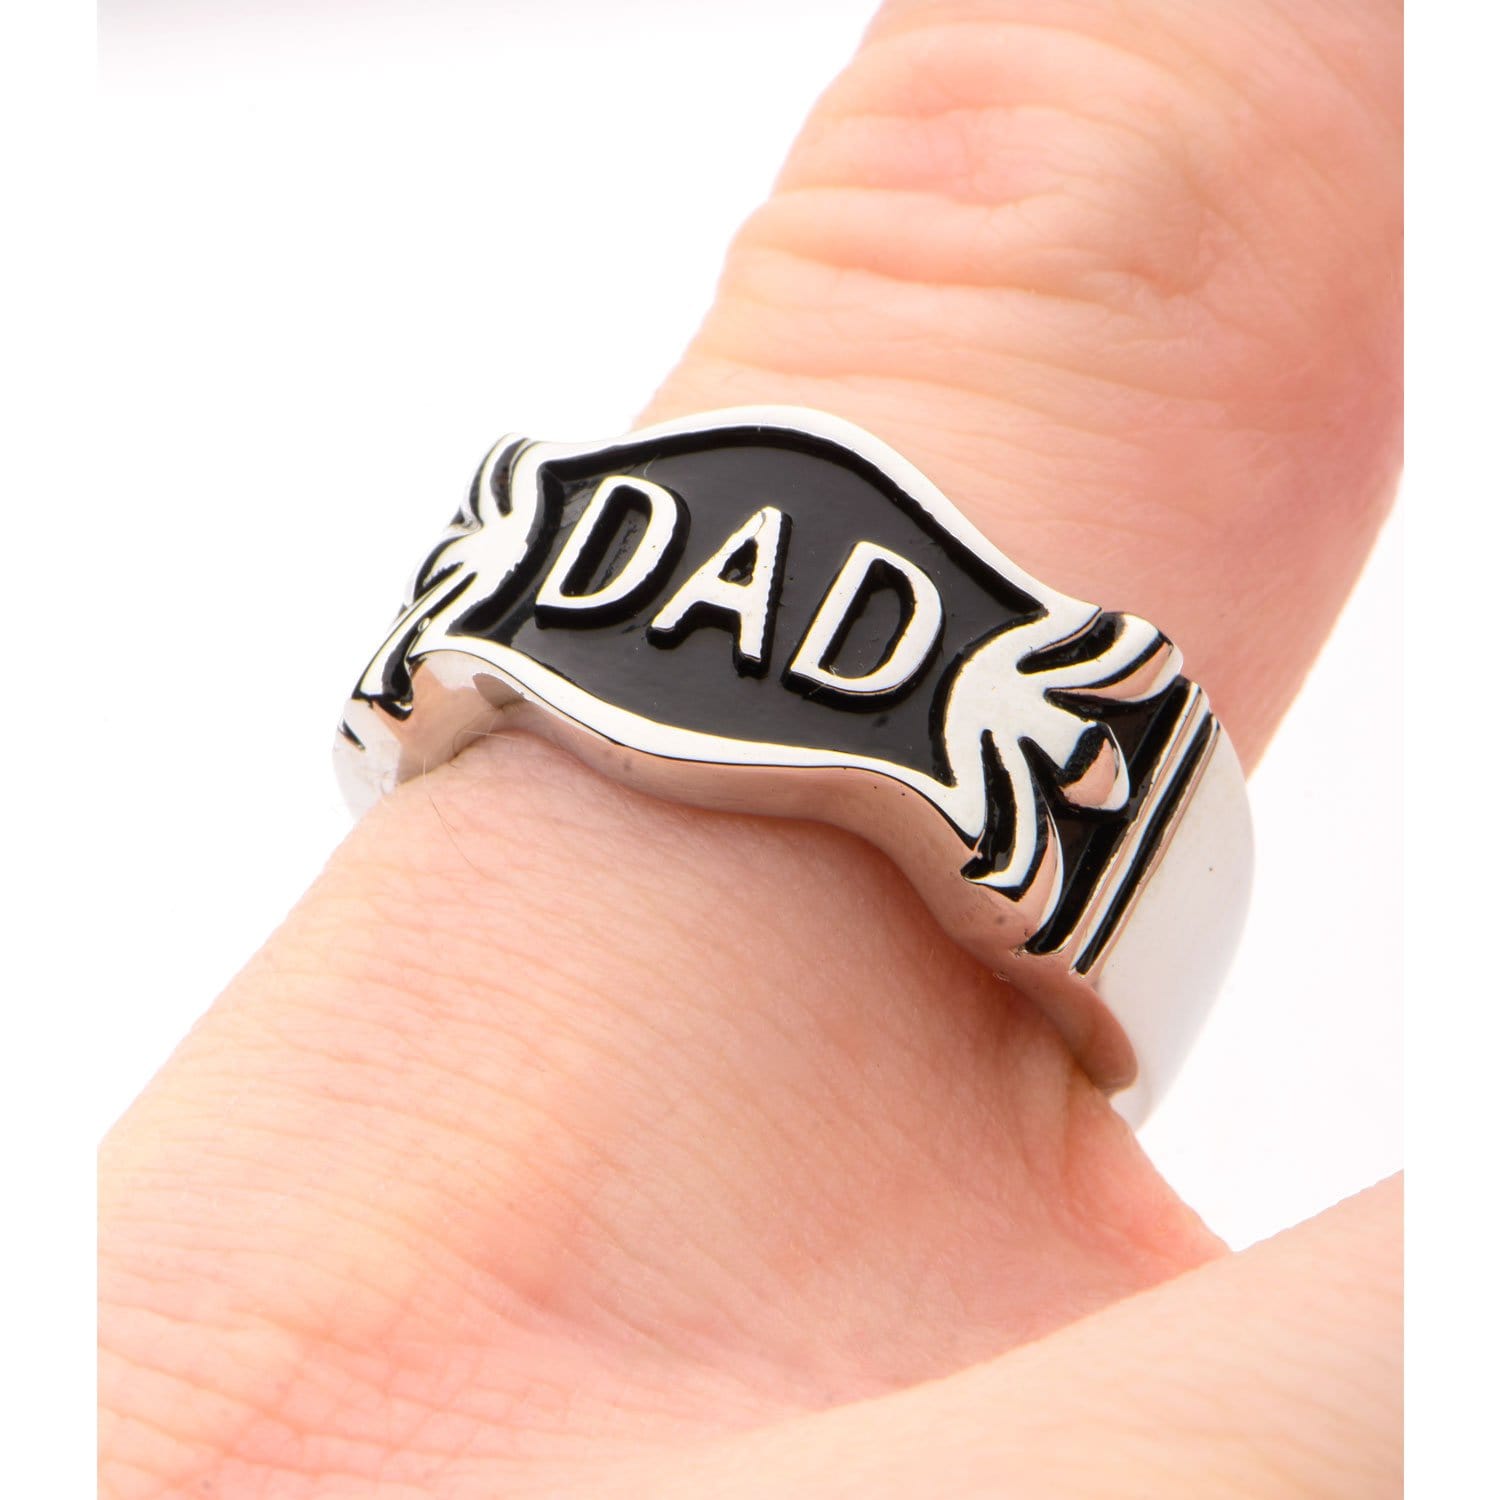 INOX JEWELRY Rings Black and Silver Tone Stainless Steel DAD Emblem Ring